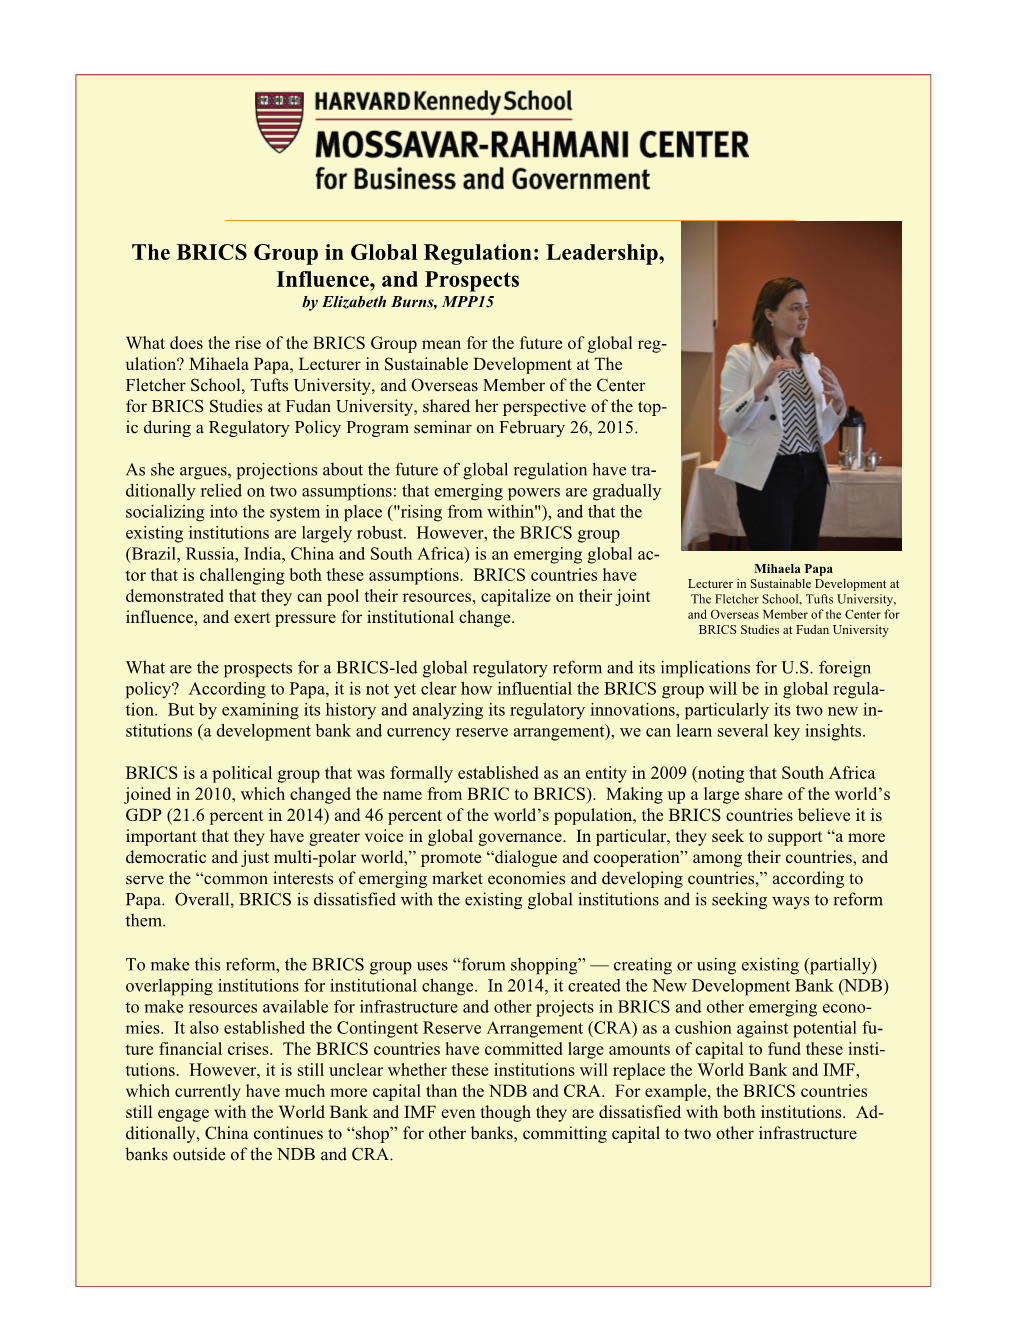 The BRICS Group in Global Regulation: Leadership, Influence, and Prospects by Elizabeth Burns, MPP15